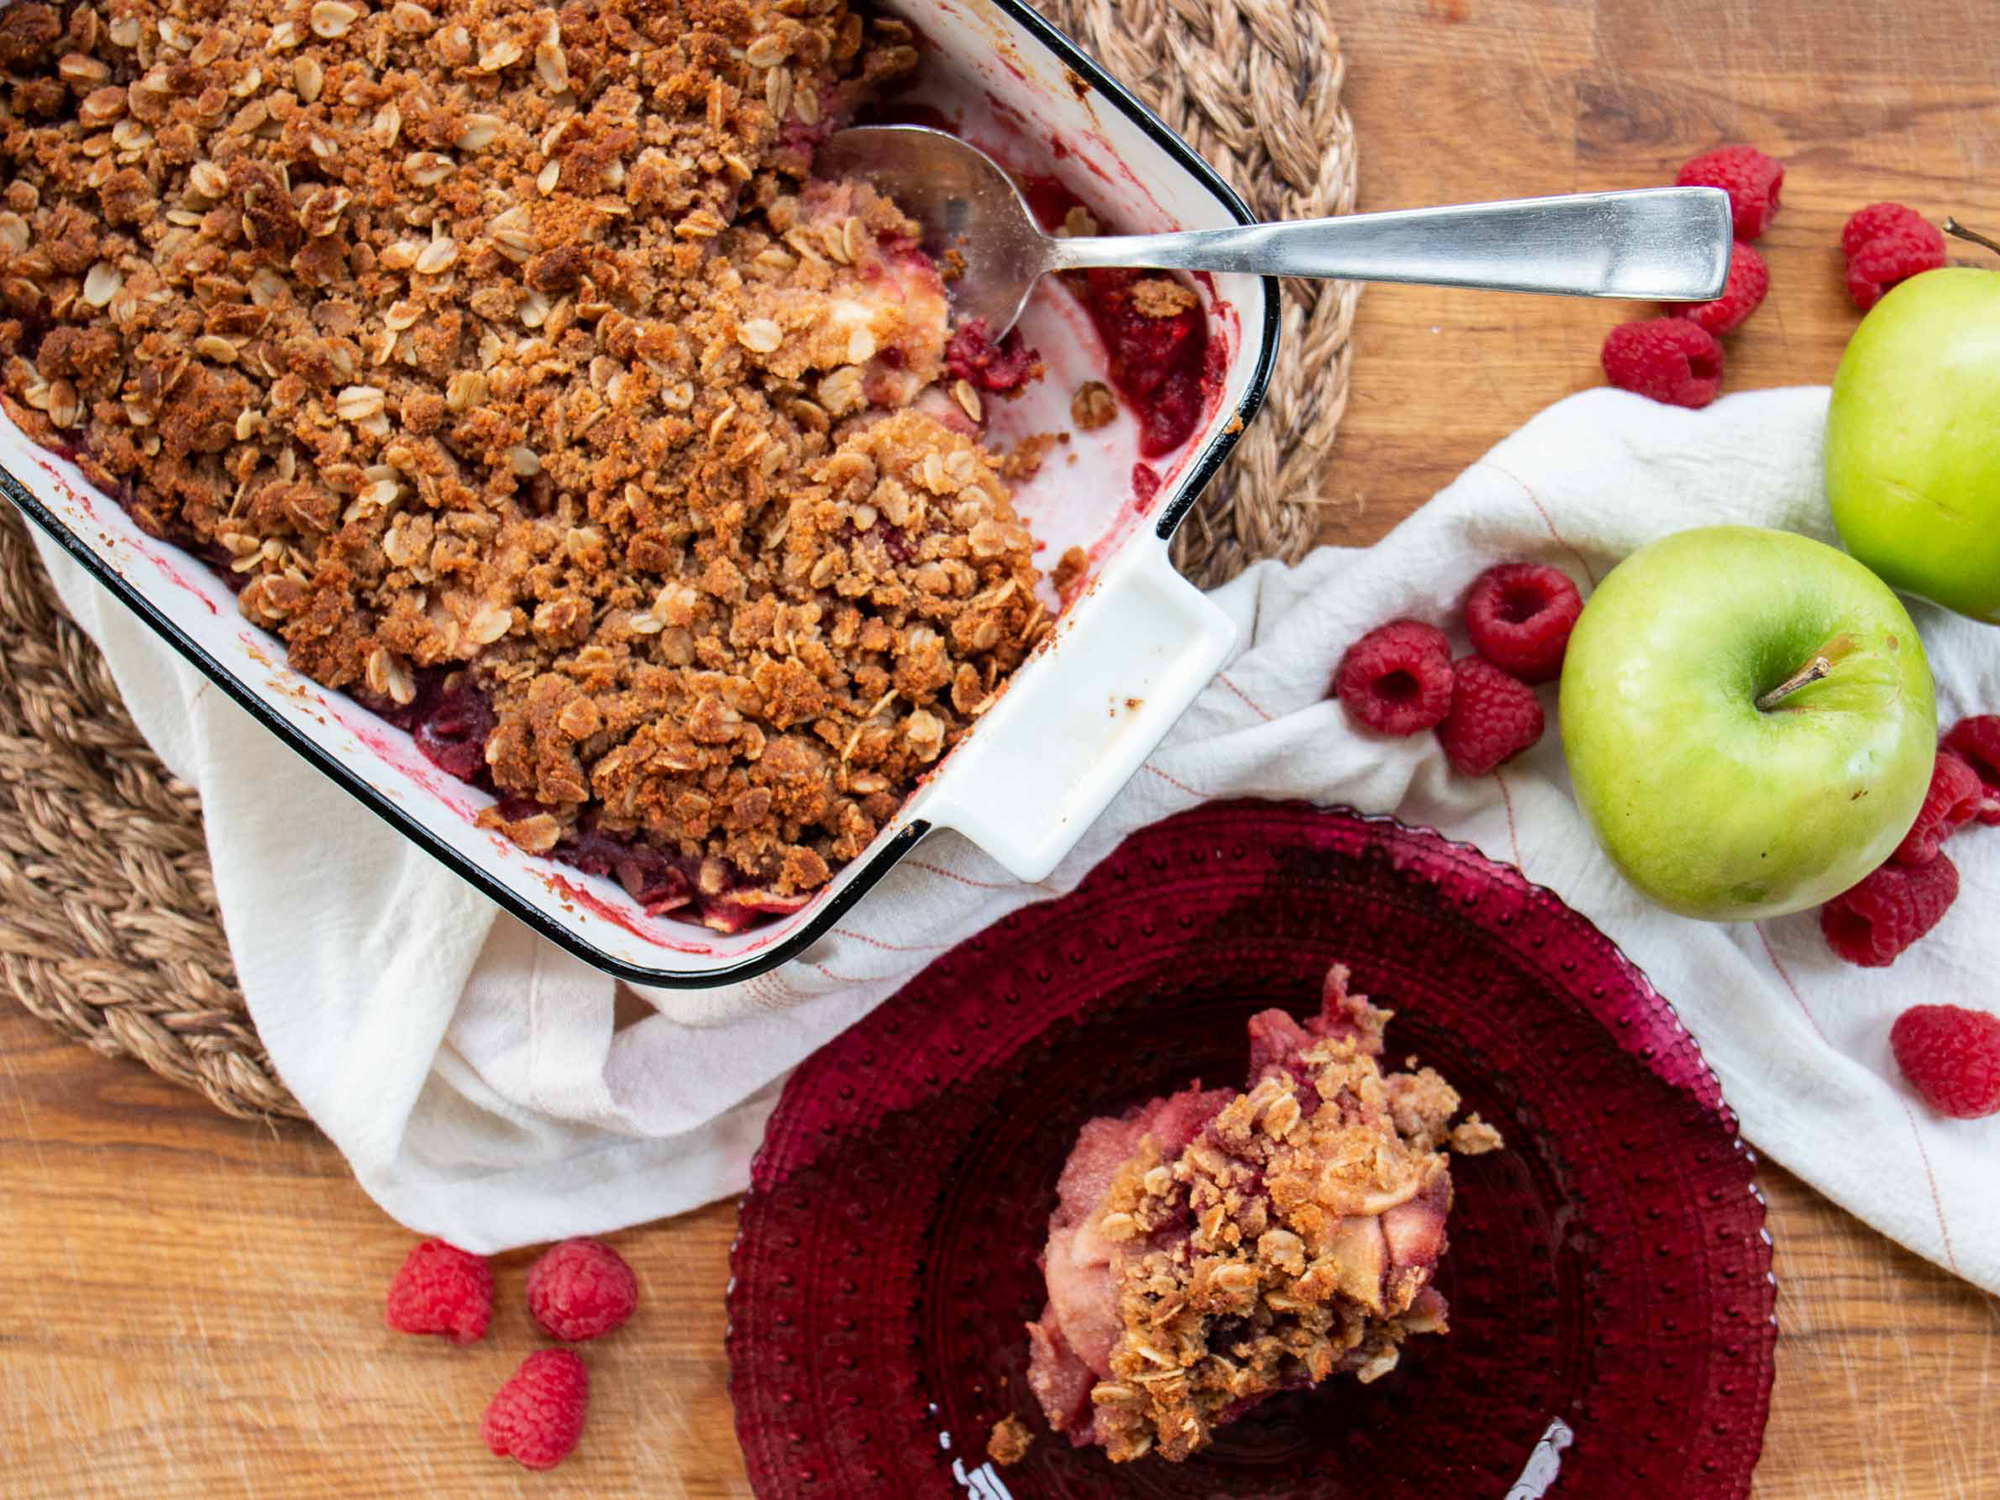 close up view of a scoop of Apple-Raspberry Crisp on a plate, and a Apple-Raspberry Crisp with a serving spoon in a baking dish, next to raspberries and apples